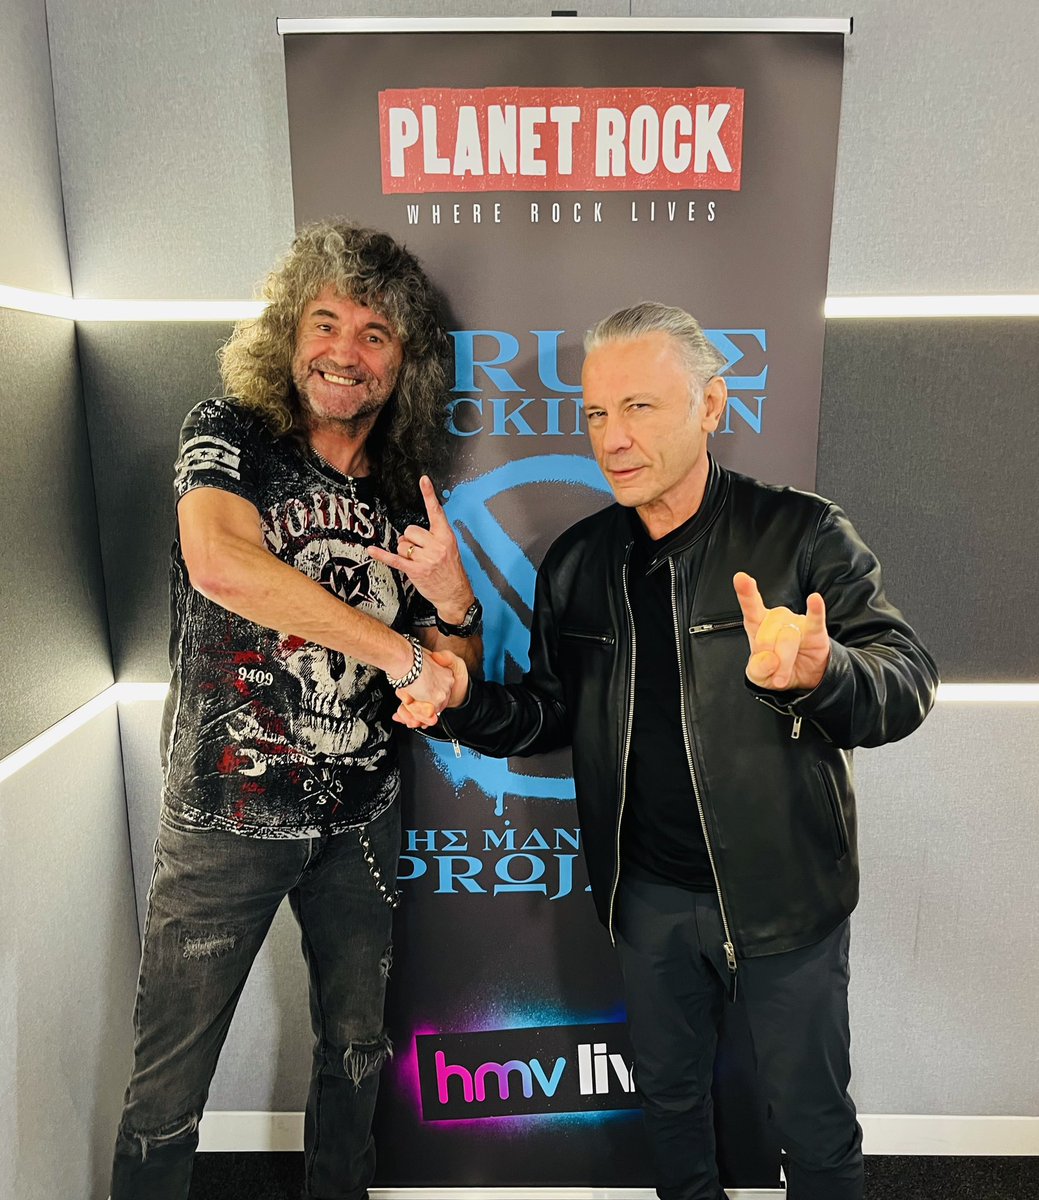 Bruce will join @PaulAnthonyRock on @PlanetRockRadio ‘s ‘My Planet Rocks’ this Sunday at 7pm! Tune in to hear the songs that inspired his career, as well as looking ahead to next week’s UK Tour. DAB / planetrock.com / App / Smart Speaker #BruceDickinson